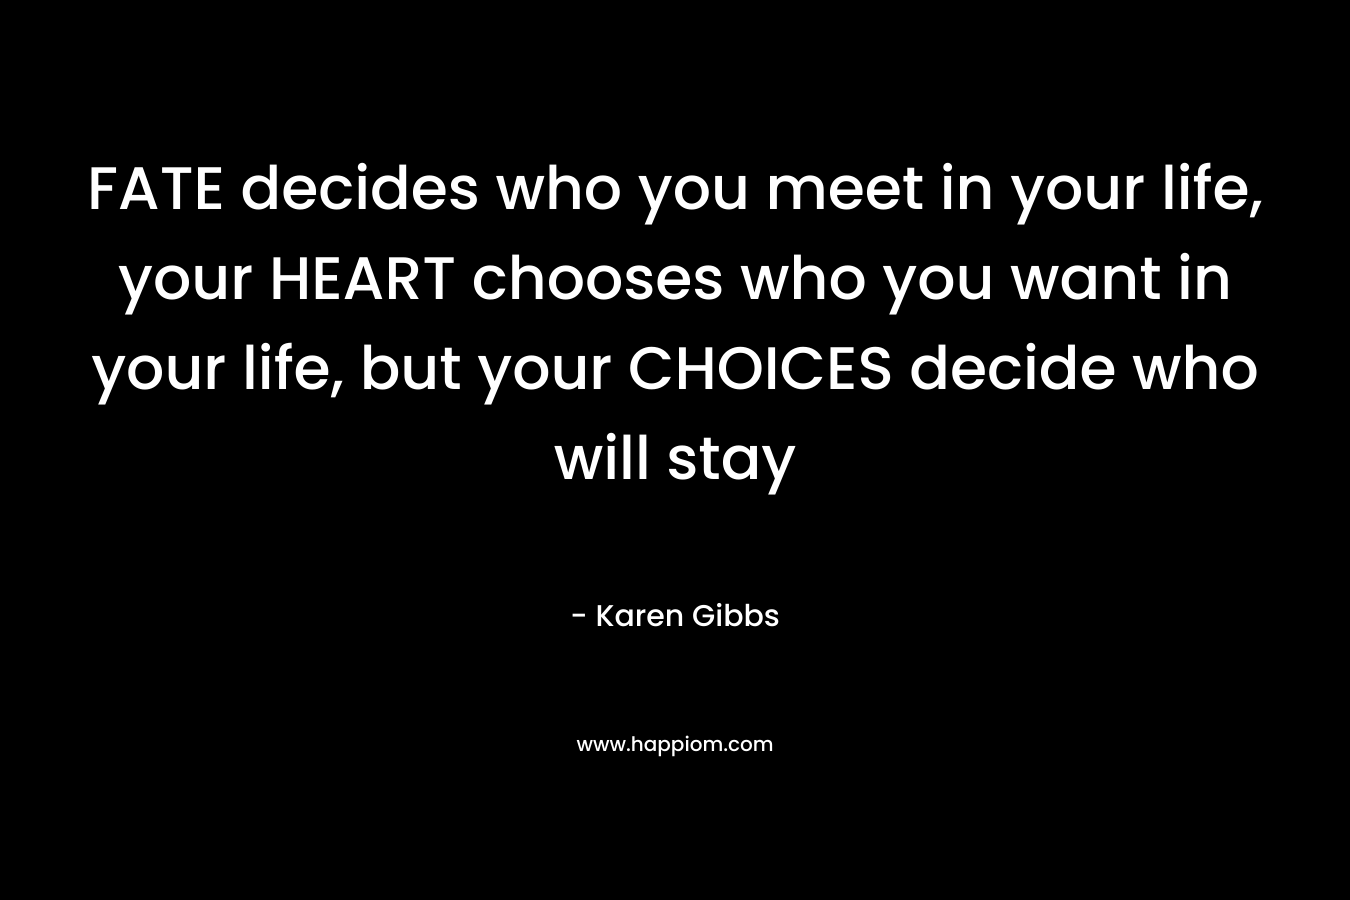 FATE decides who you meet in your life, your HEART chooses who you want in your life, but your CHOICES decide who will stay